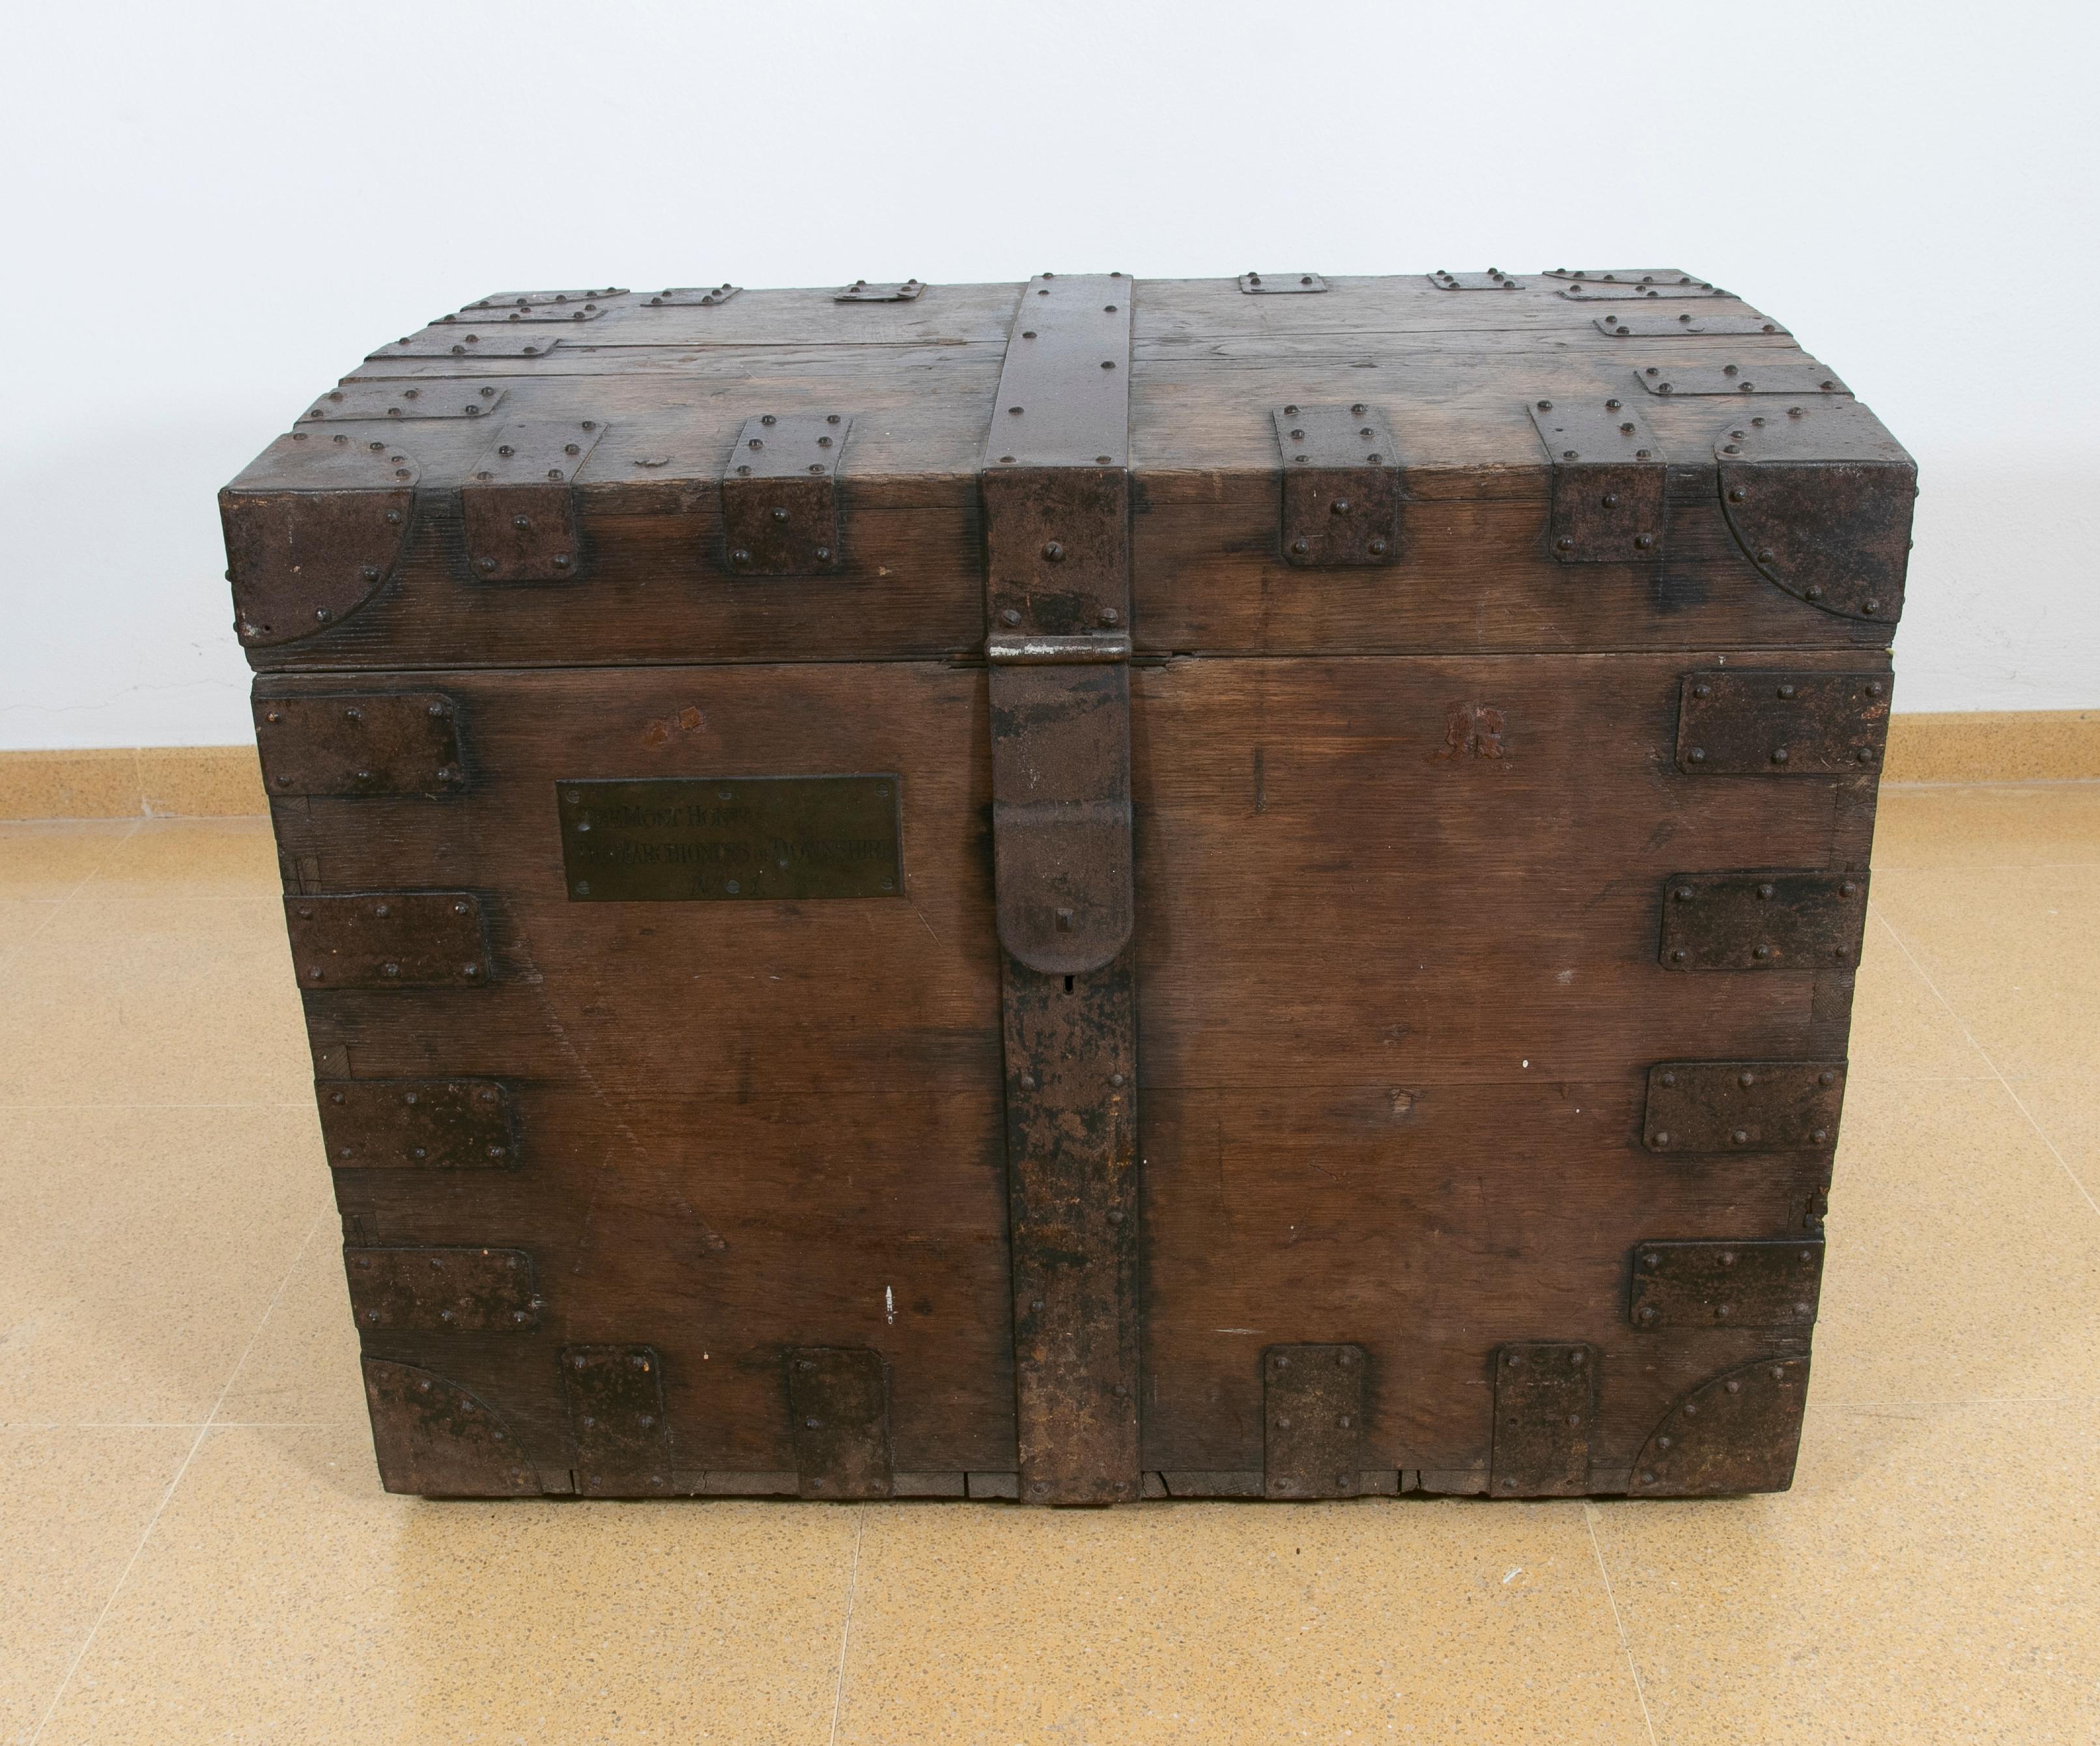 English wooden travelling case which belonged to the honourable marquess of lansdowne.